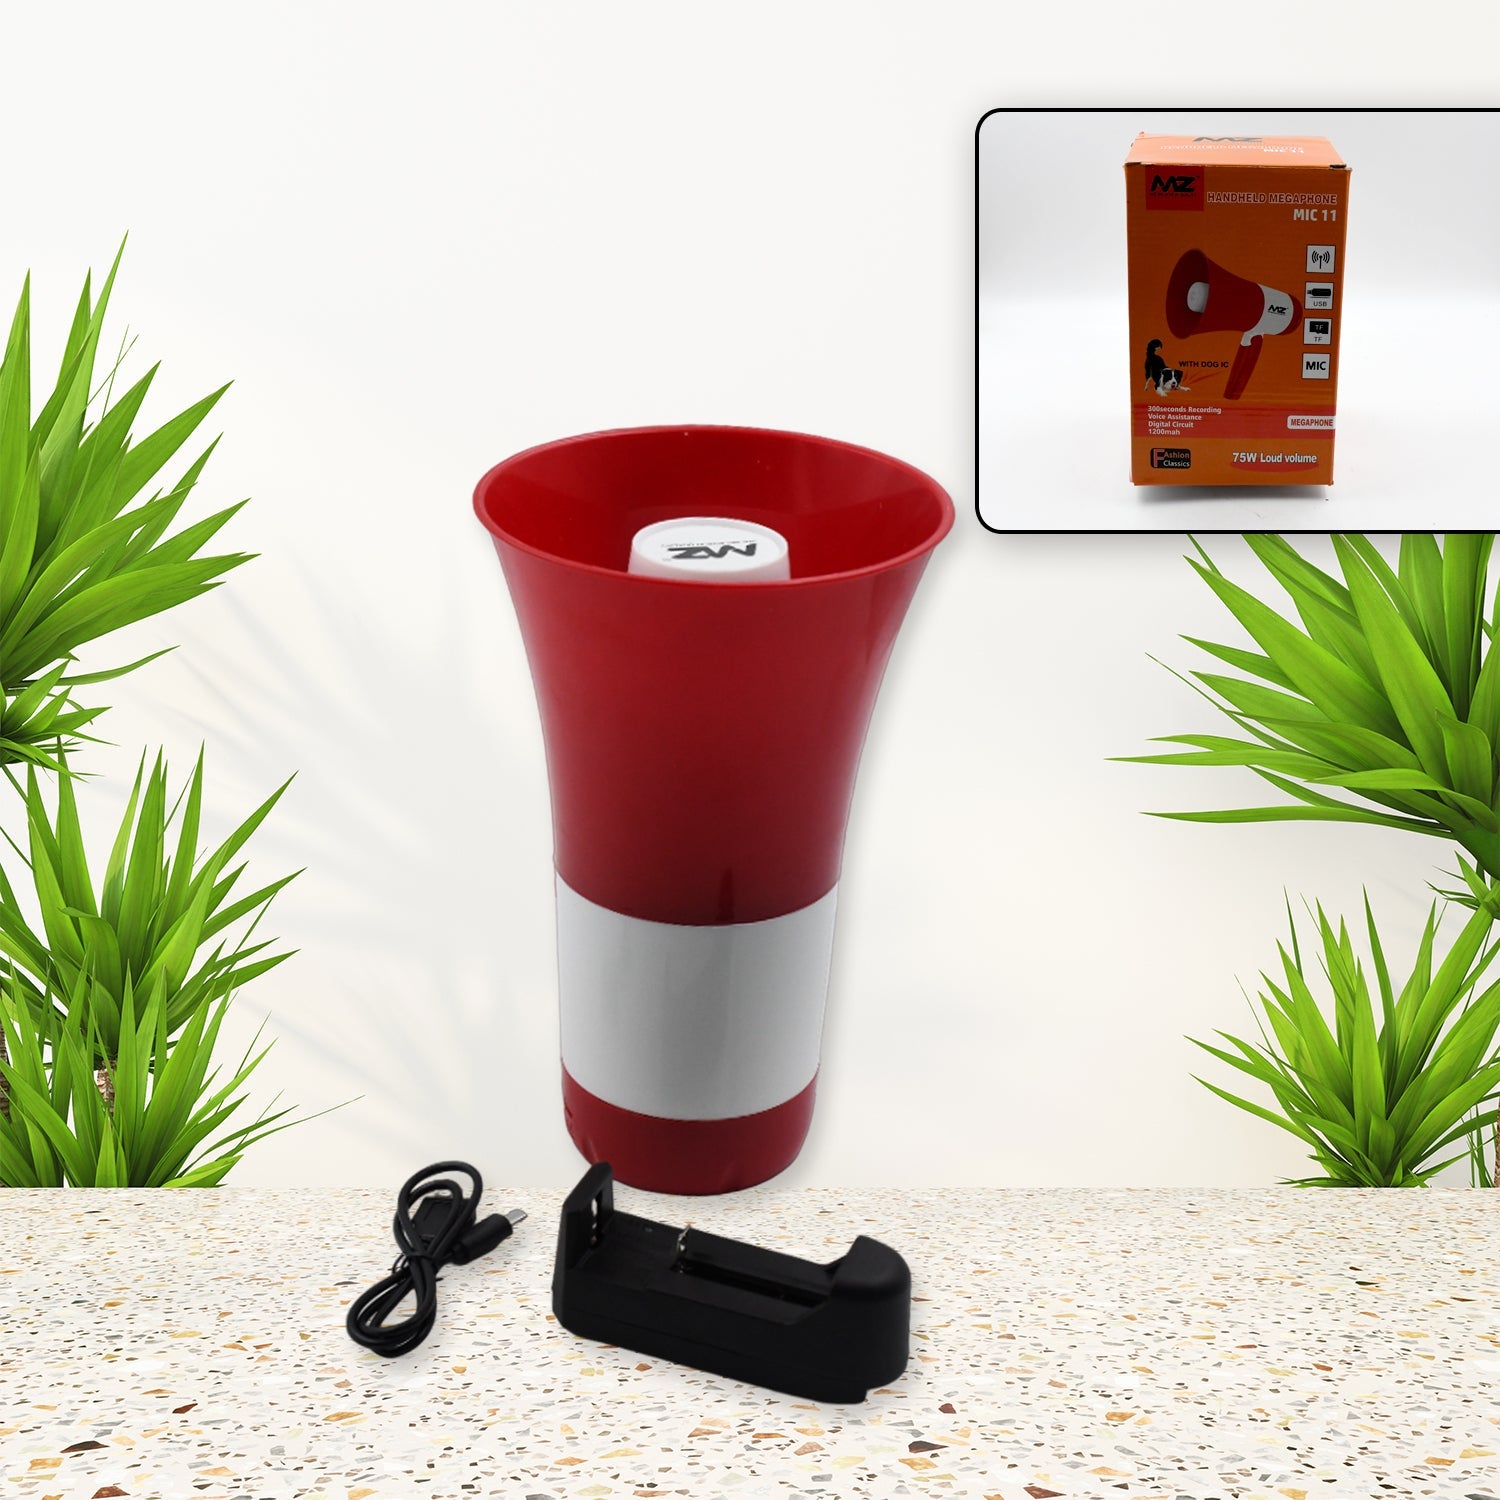 6421a Megaphone Bluetooth 75 Watts Handheld Dynamic Megaphone Outdoor, Indoor PA System Talk/Record/Play/Music/Siren